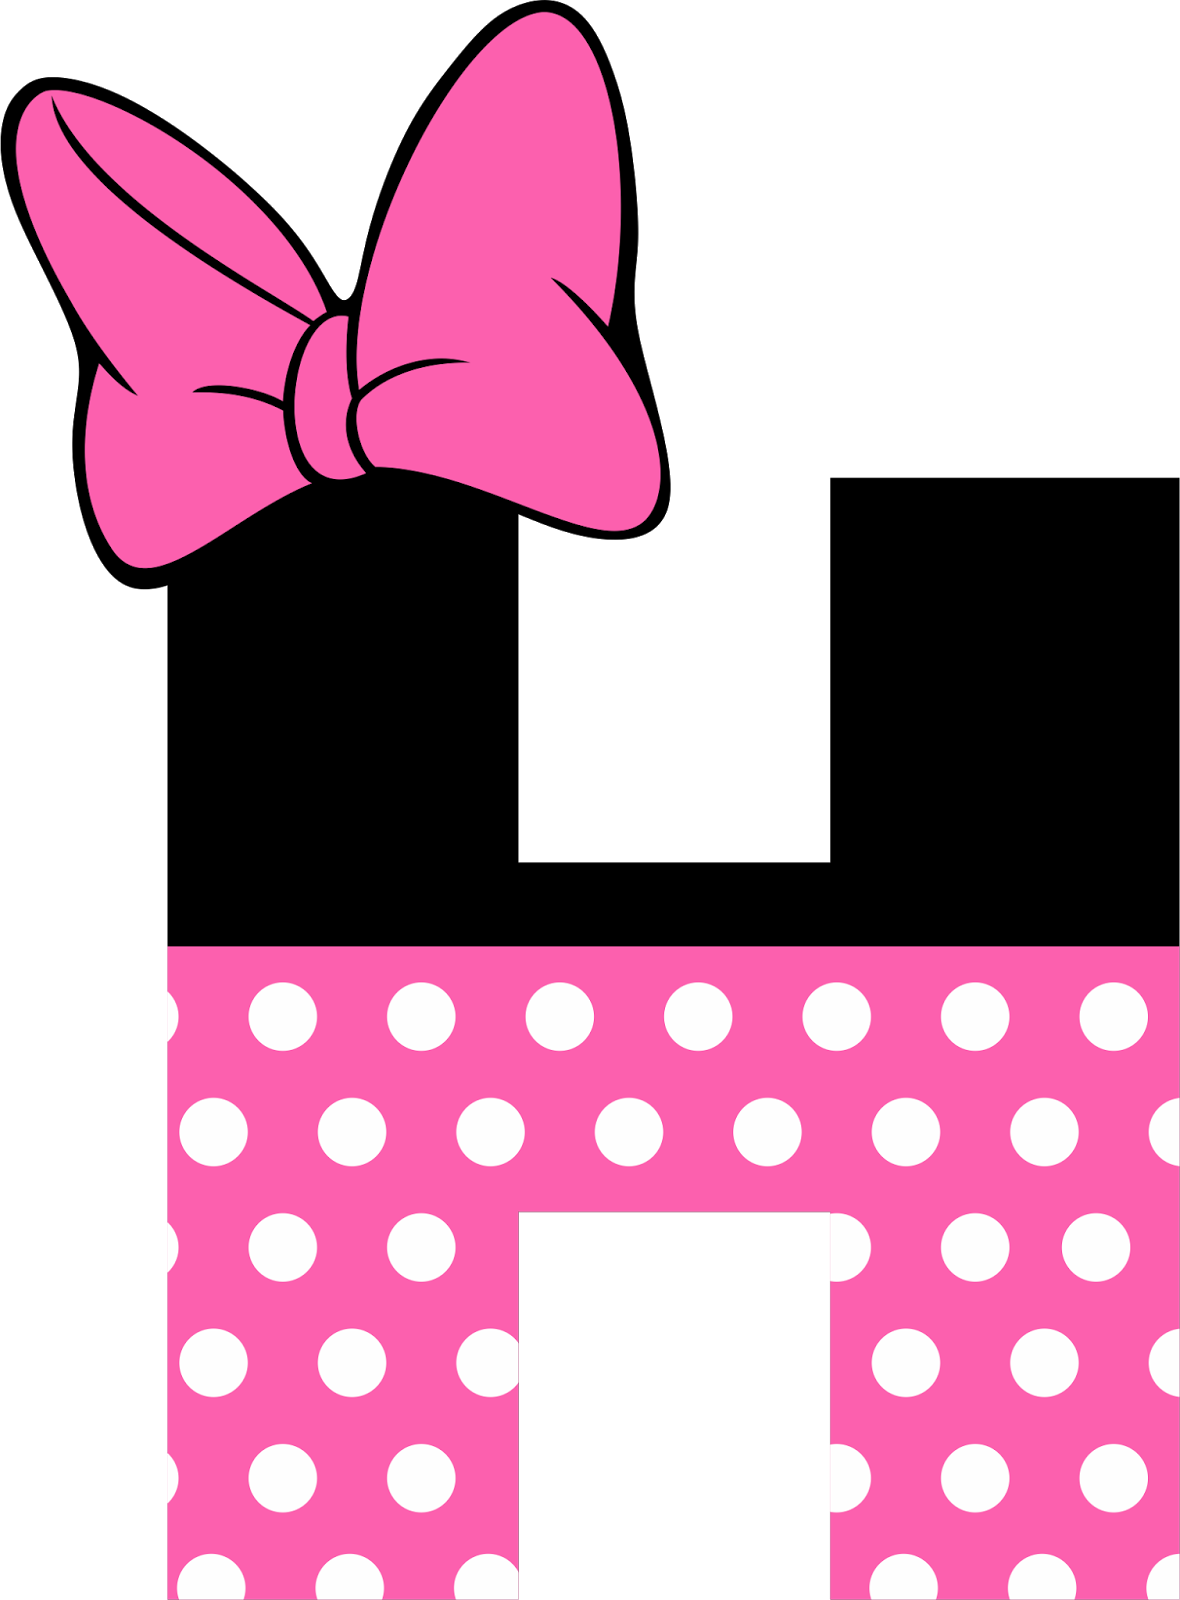 A Pink Bow And Polka Dot Square